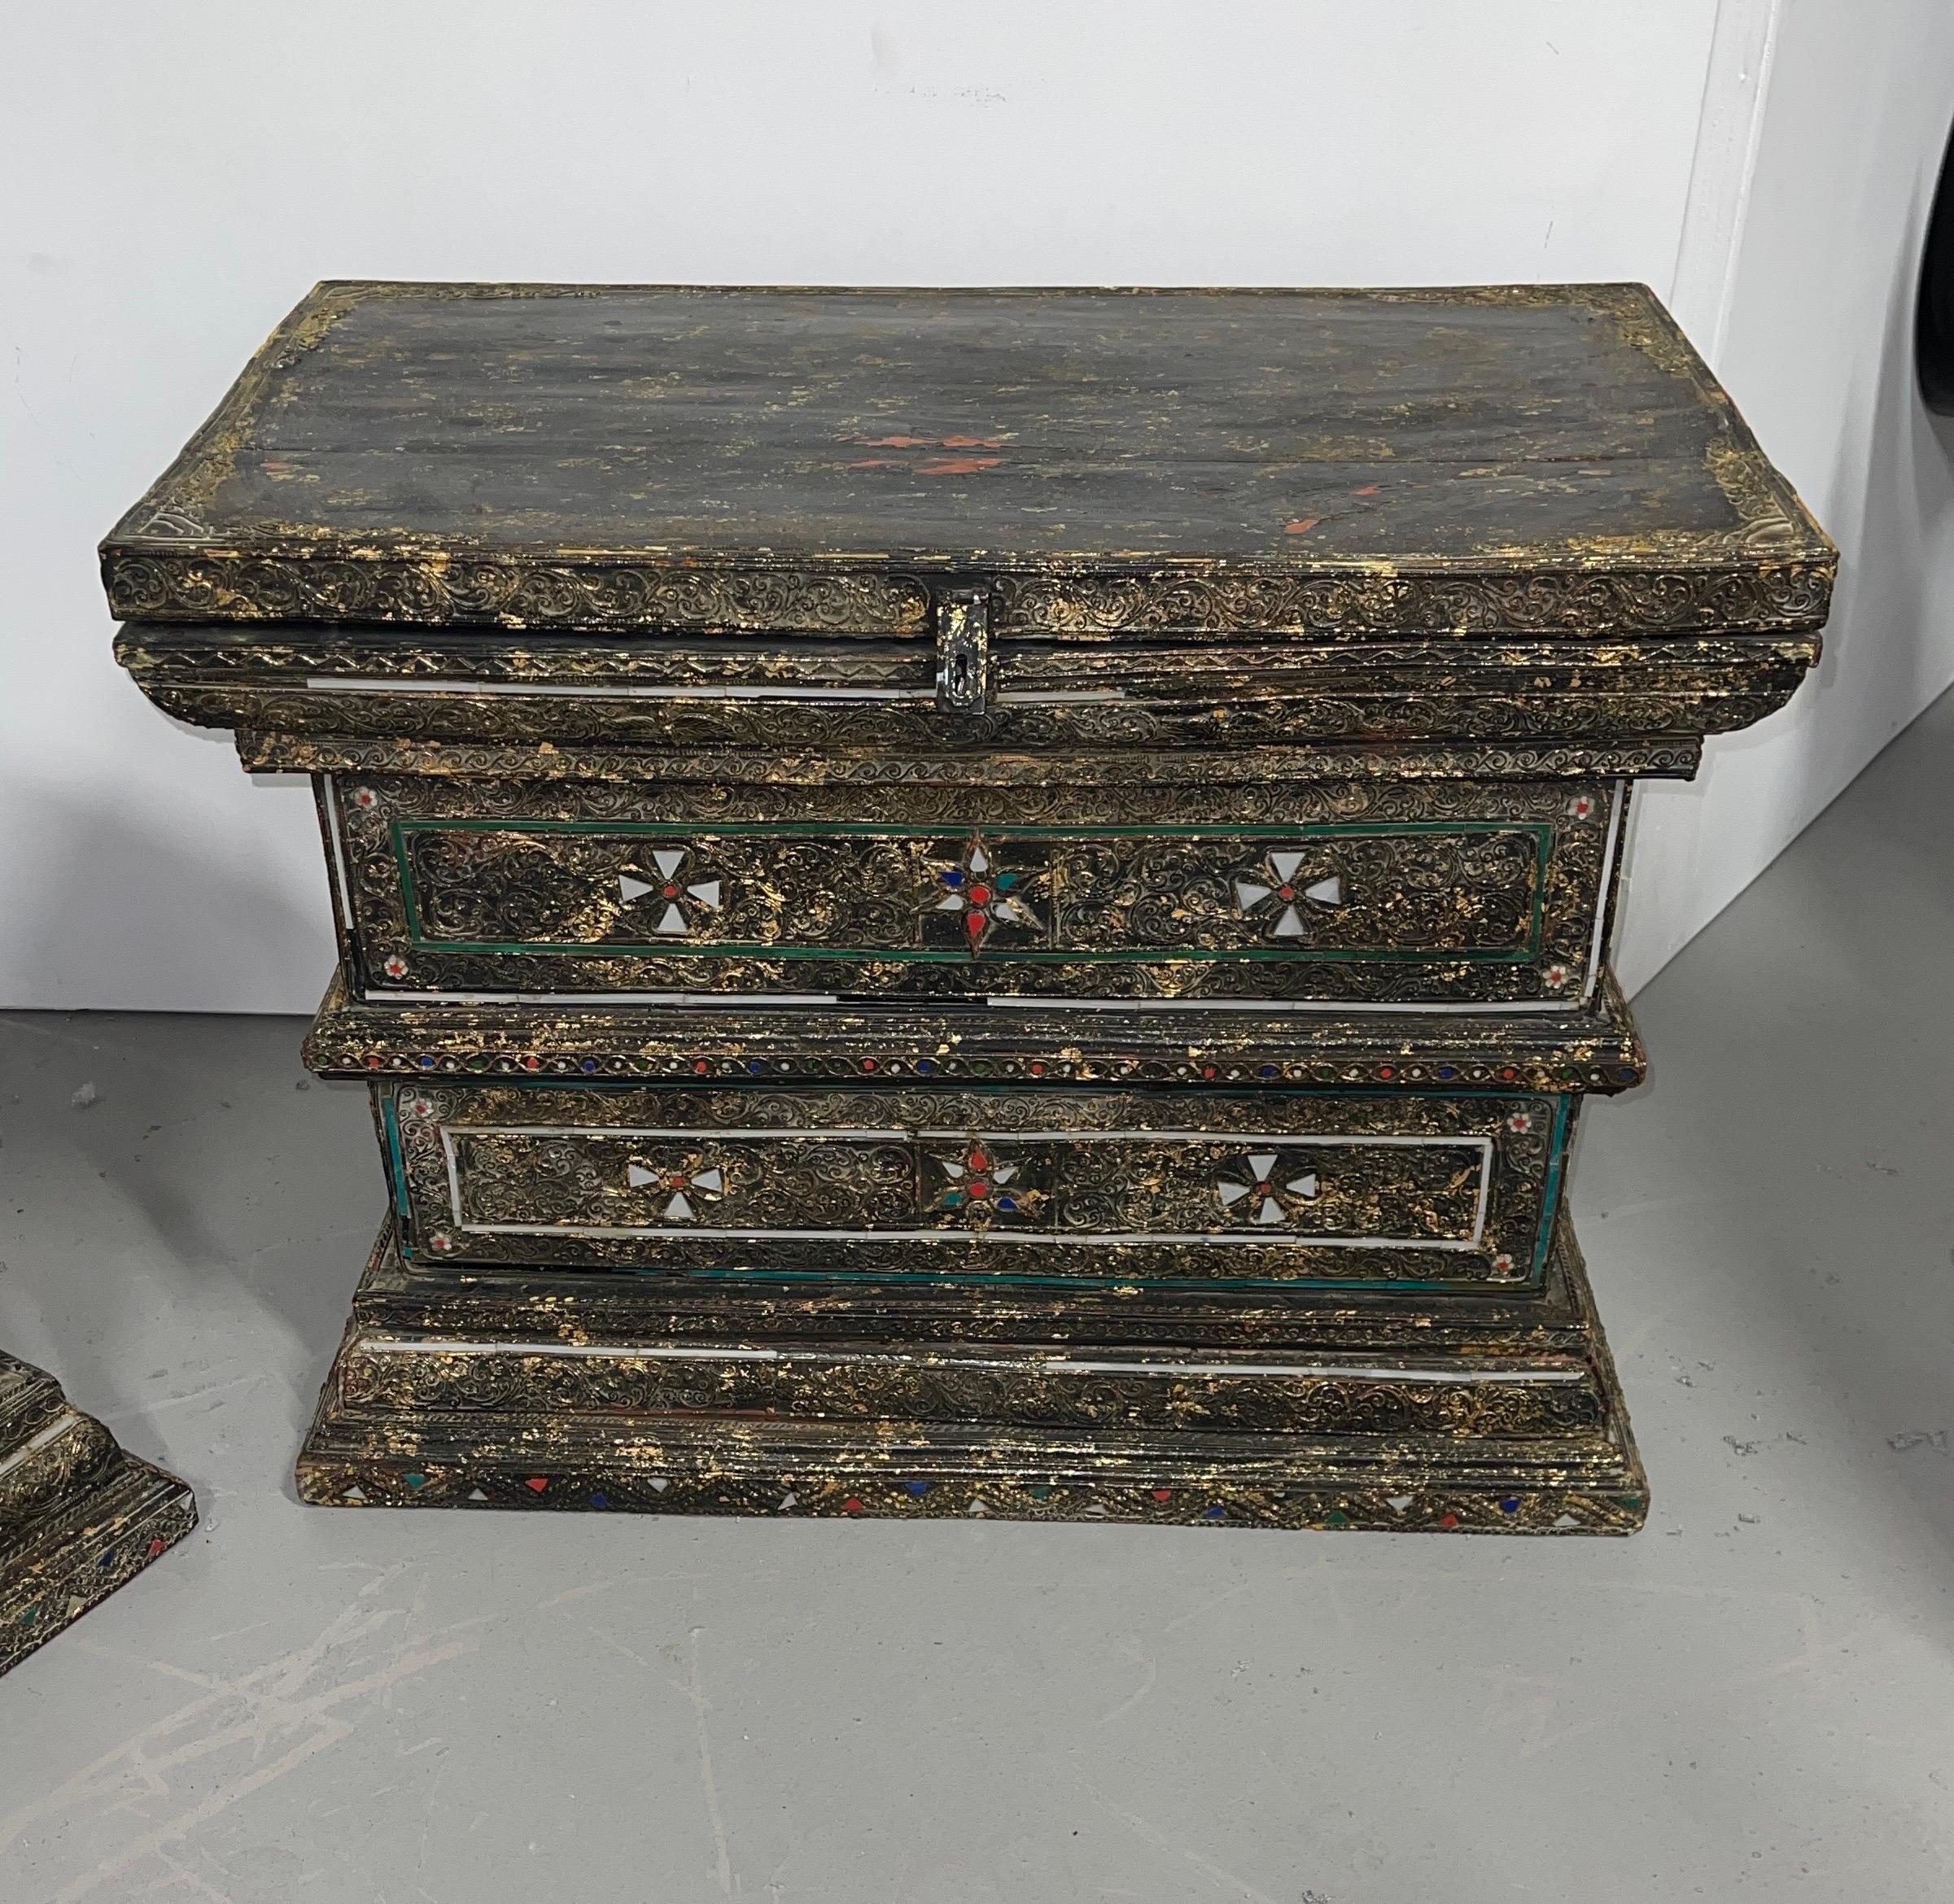 An unusual pair of inlaid dowry or wedding chests. Beautiful inlay of different color glass patterns and carved areas. The entire surface has been painted then has gold leaf splotches applied. They have Maltese type crosses and greenish glass border